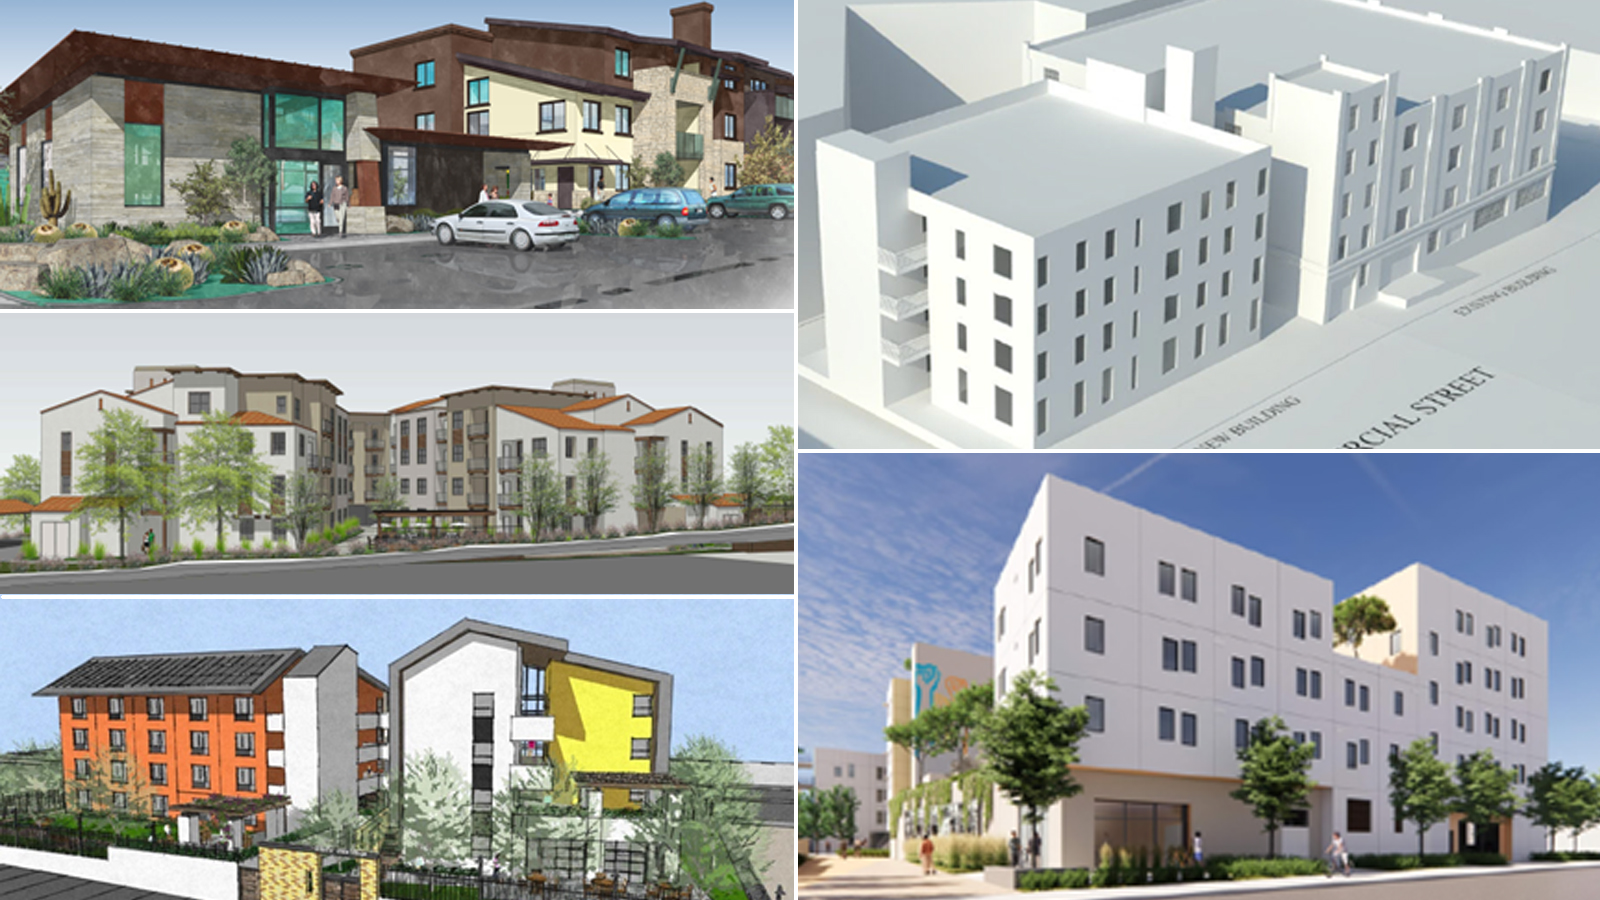 five images of housing units in a collage